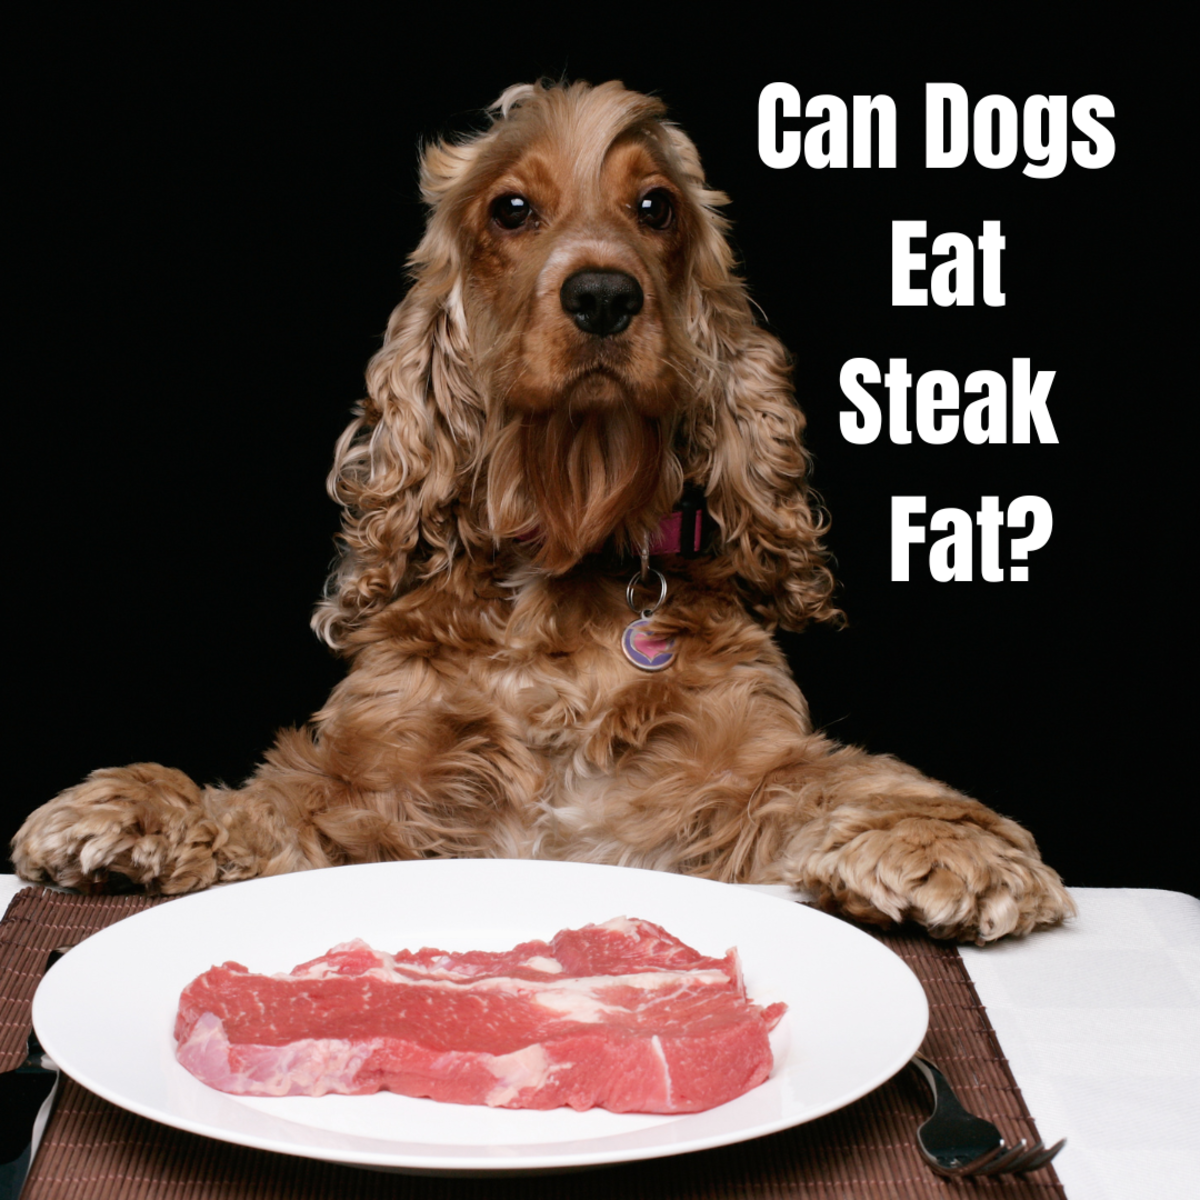 Can Dogs Eat Cooked Steak Fat?